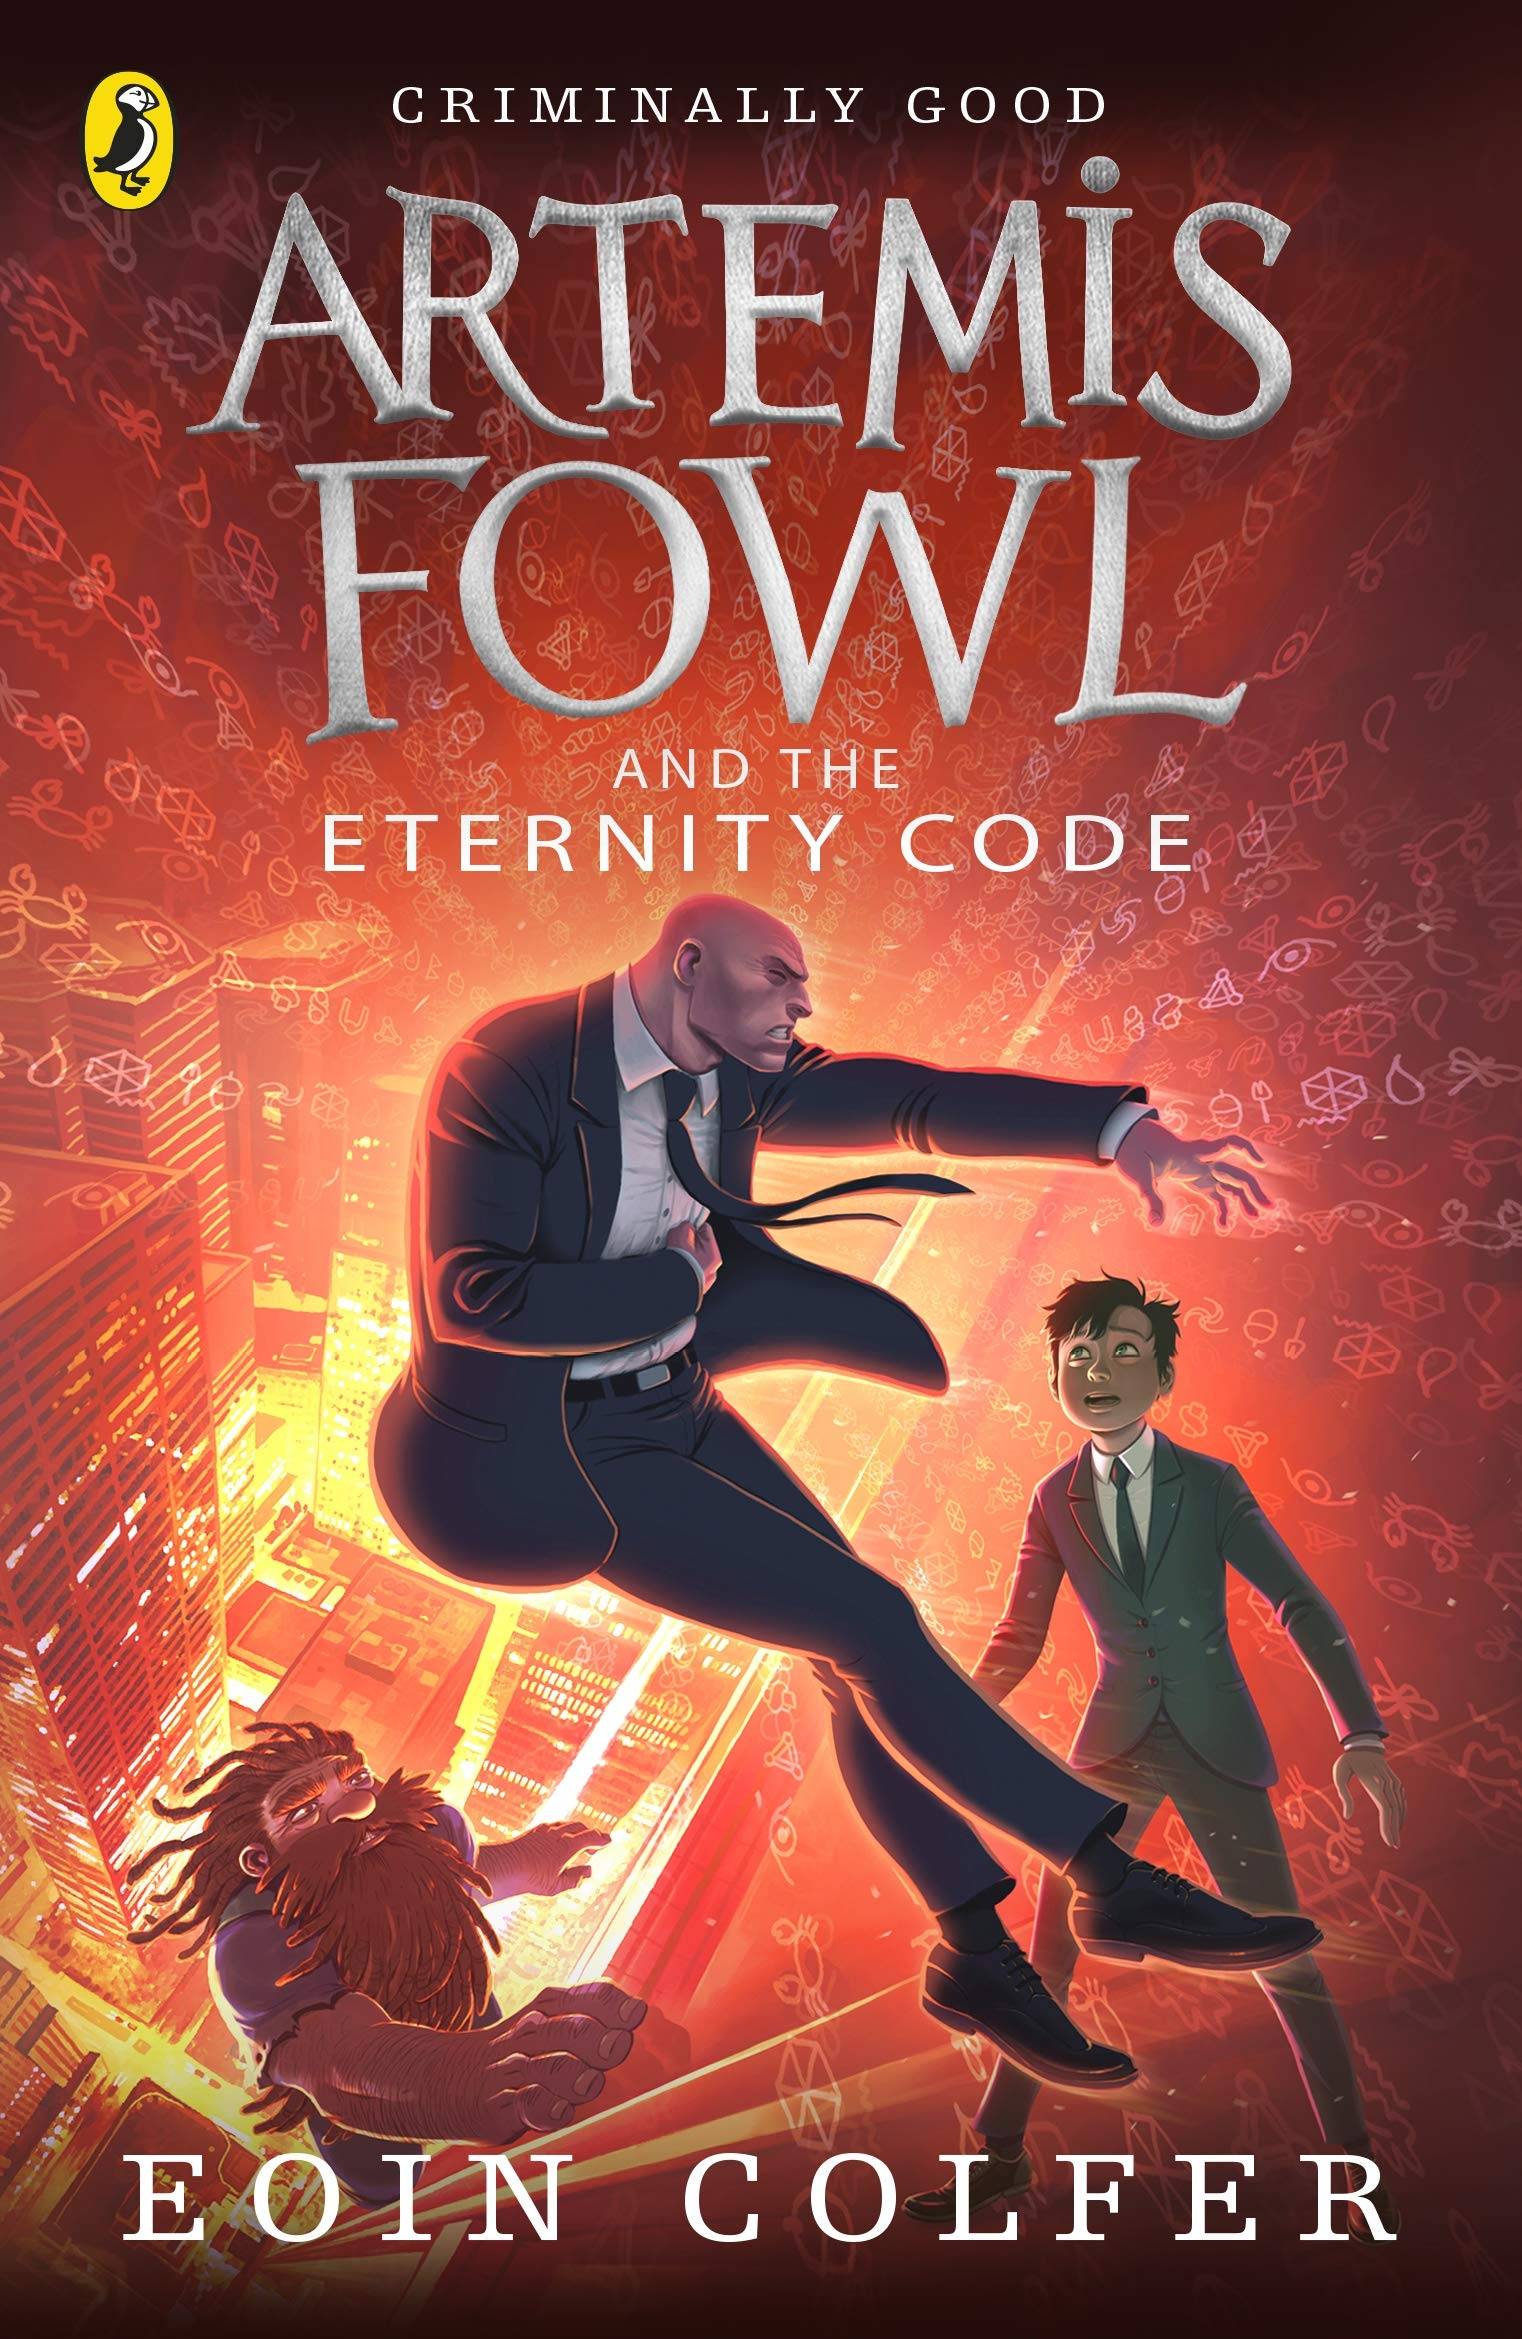 IMG : Artemis Fowl And The Eternity Code #3